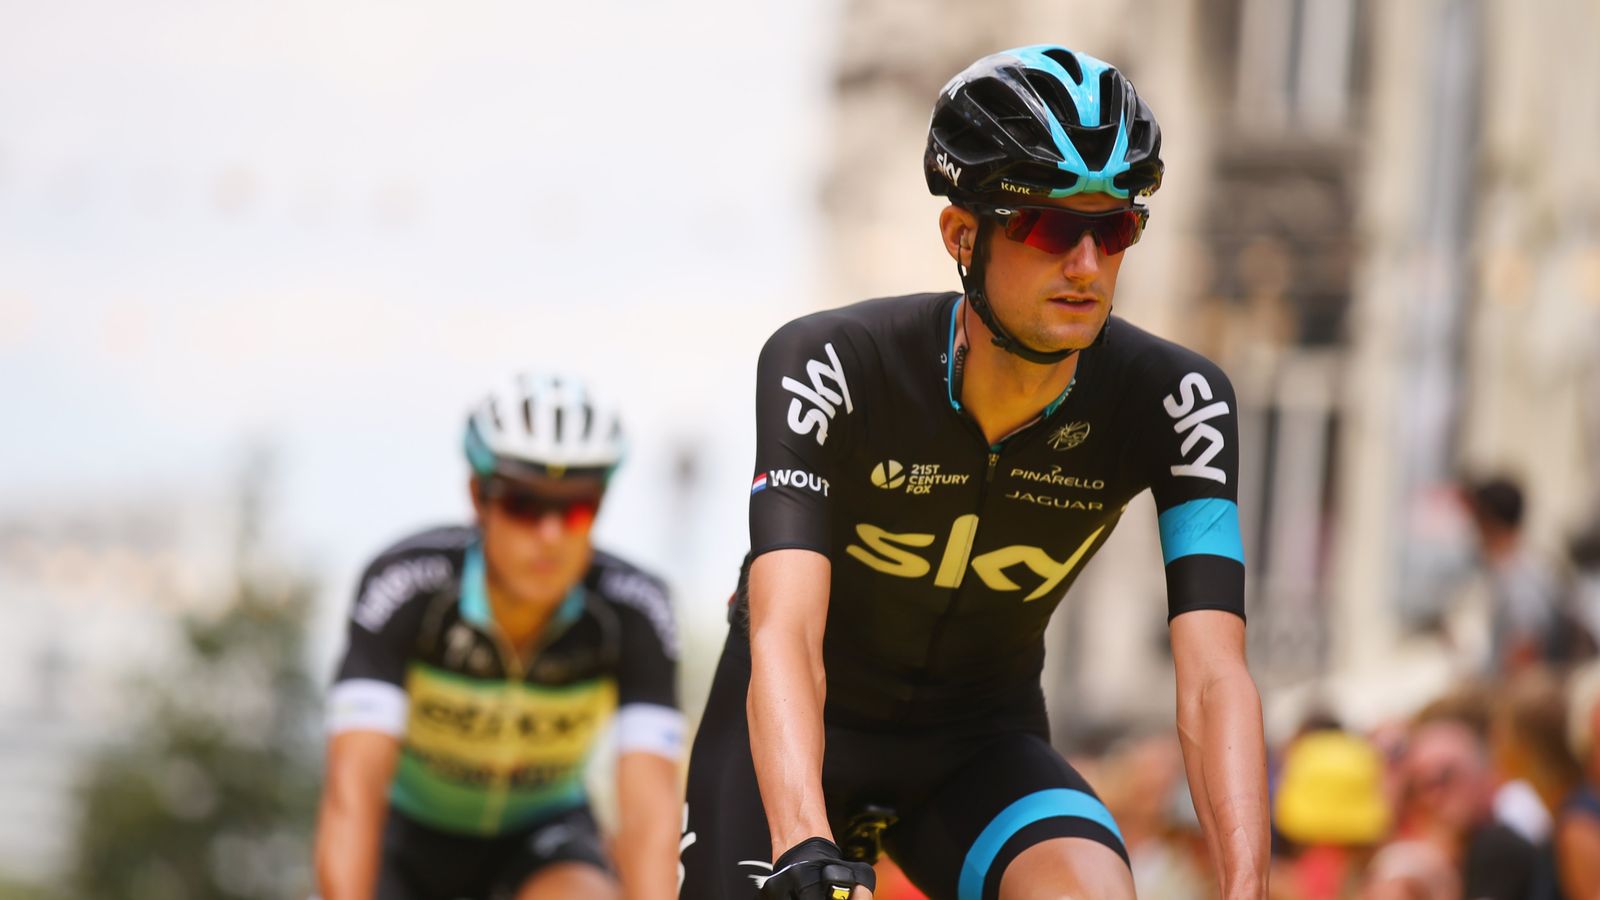 Team Sky's Wout Poels keen to lead at Giro d'Italia or Vuelta a Espana ...